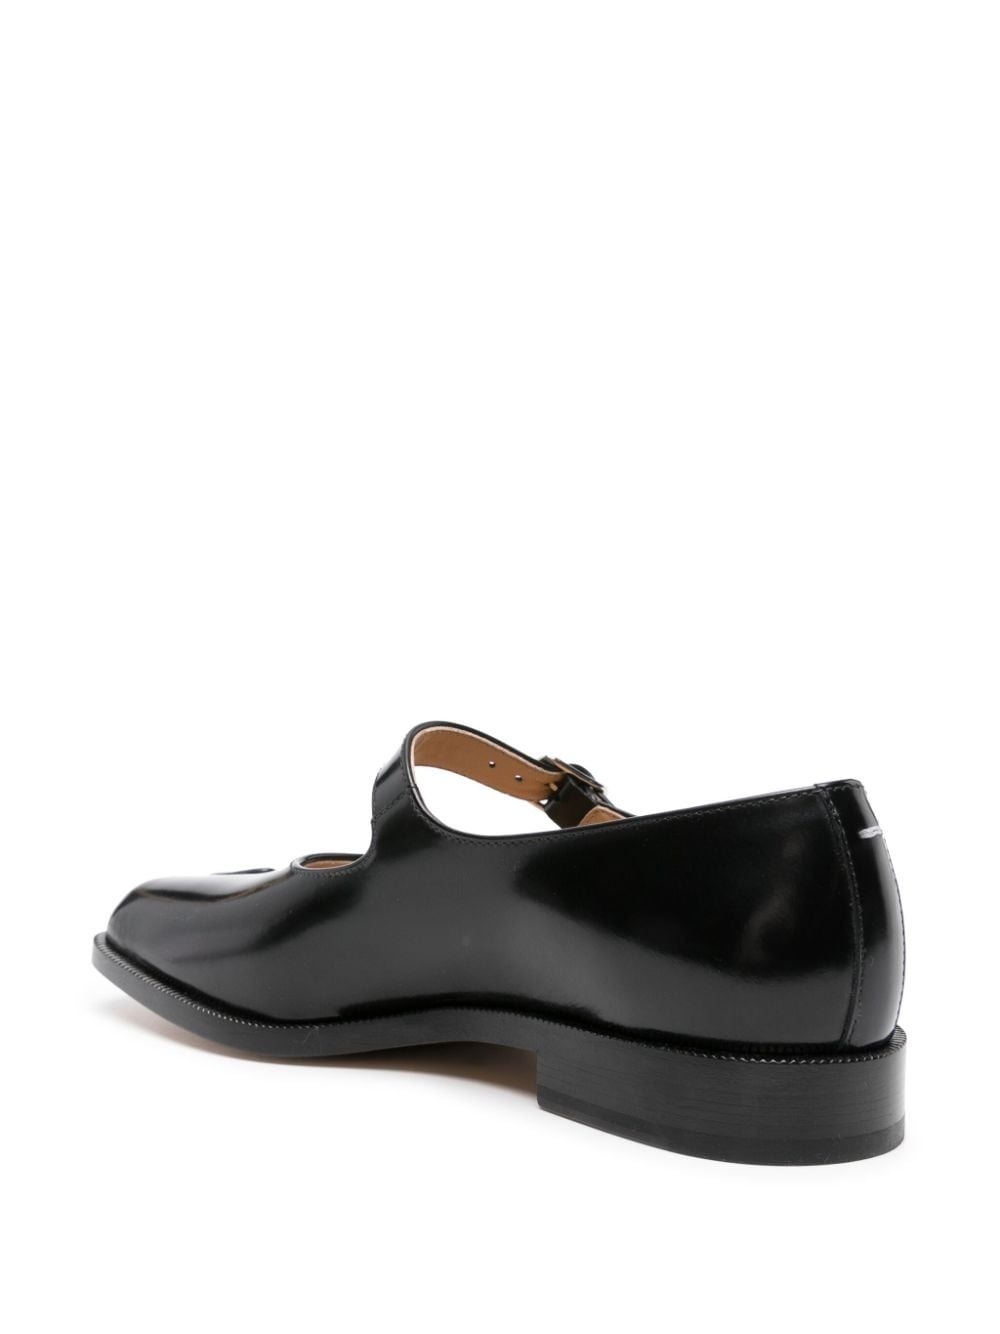 Tabi leather Mary-Janes - 3